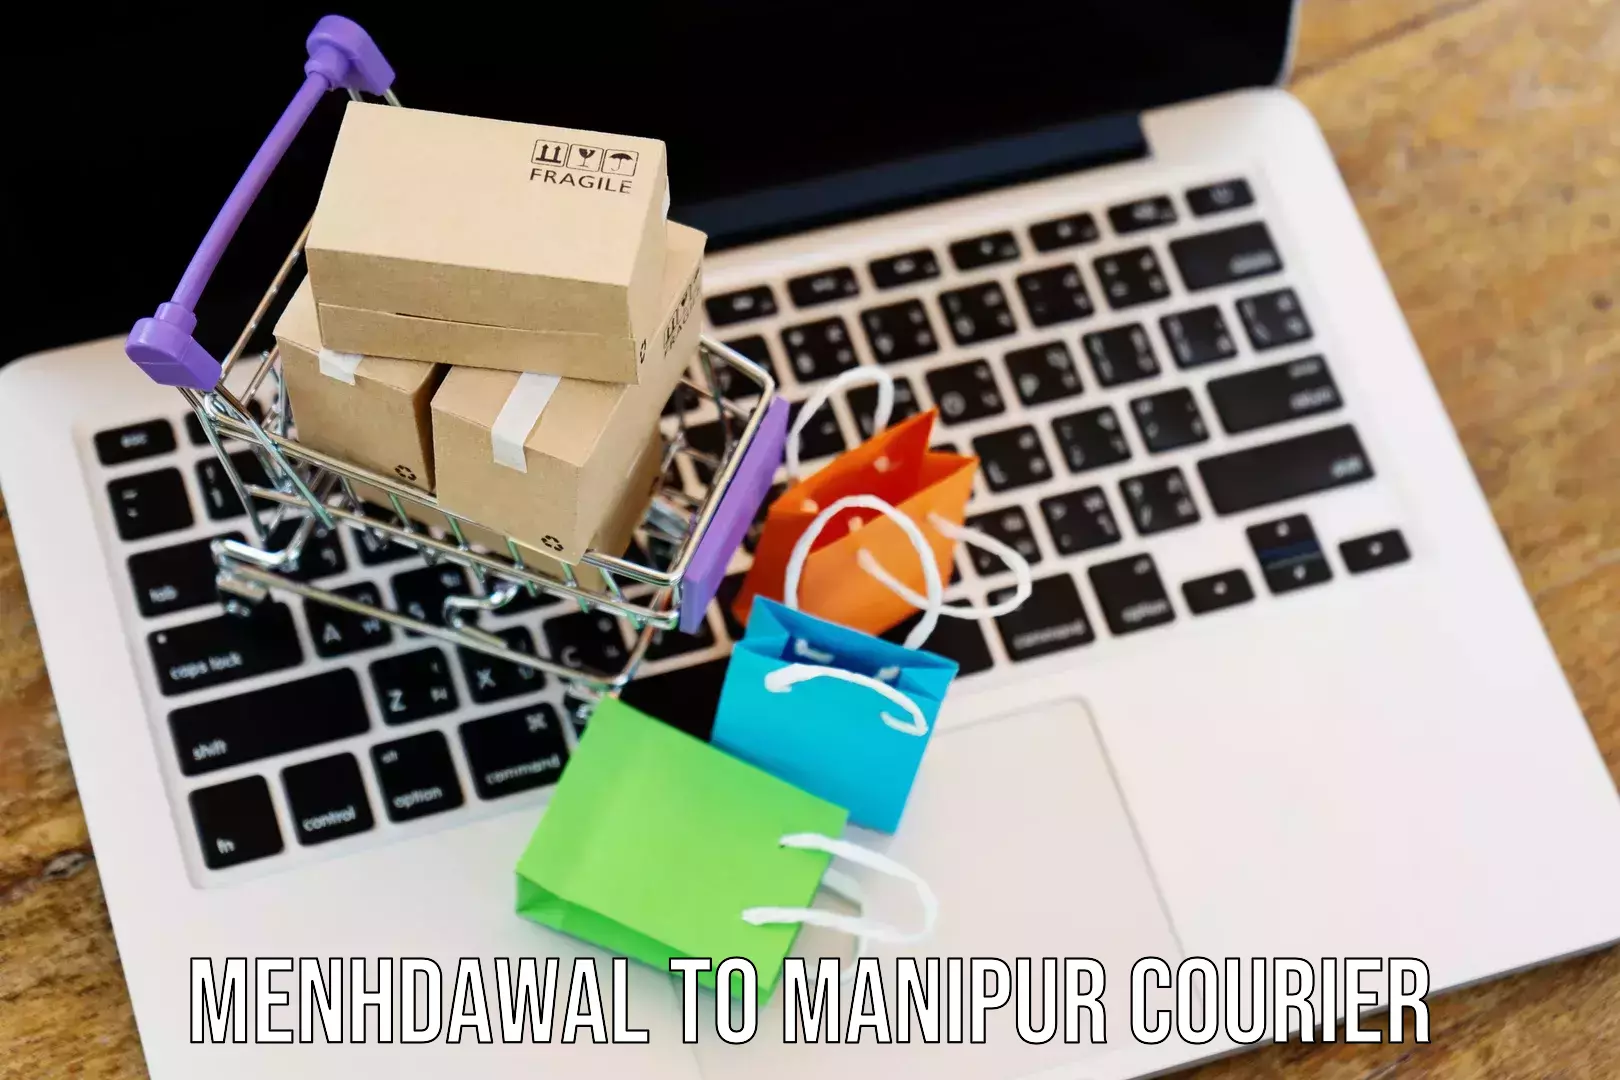 Next-generation courier services Menhdawal to Manipur